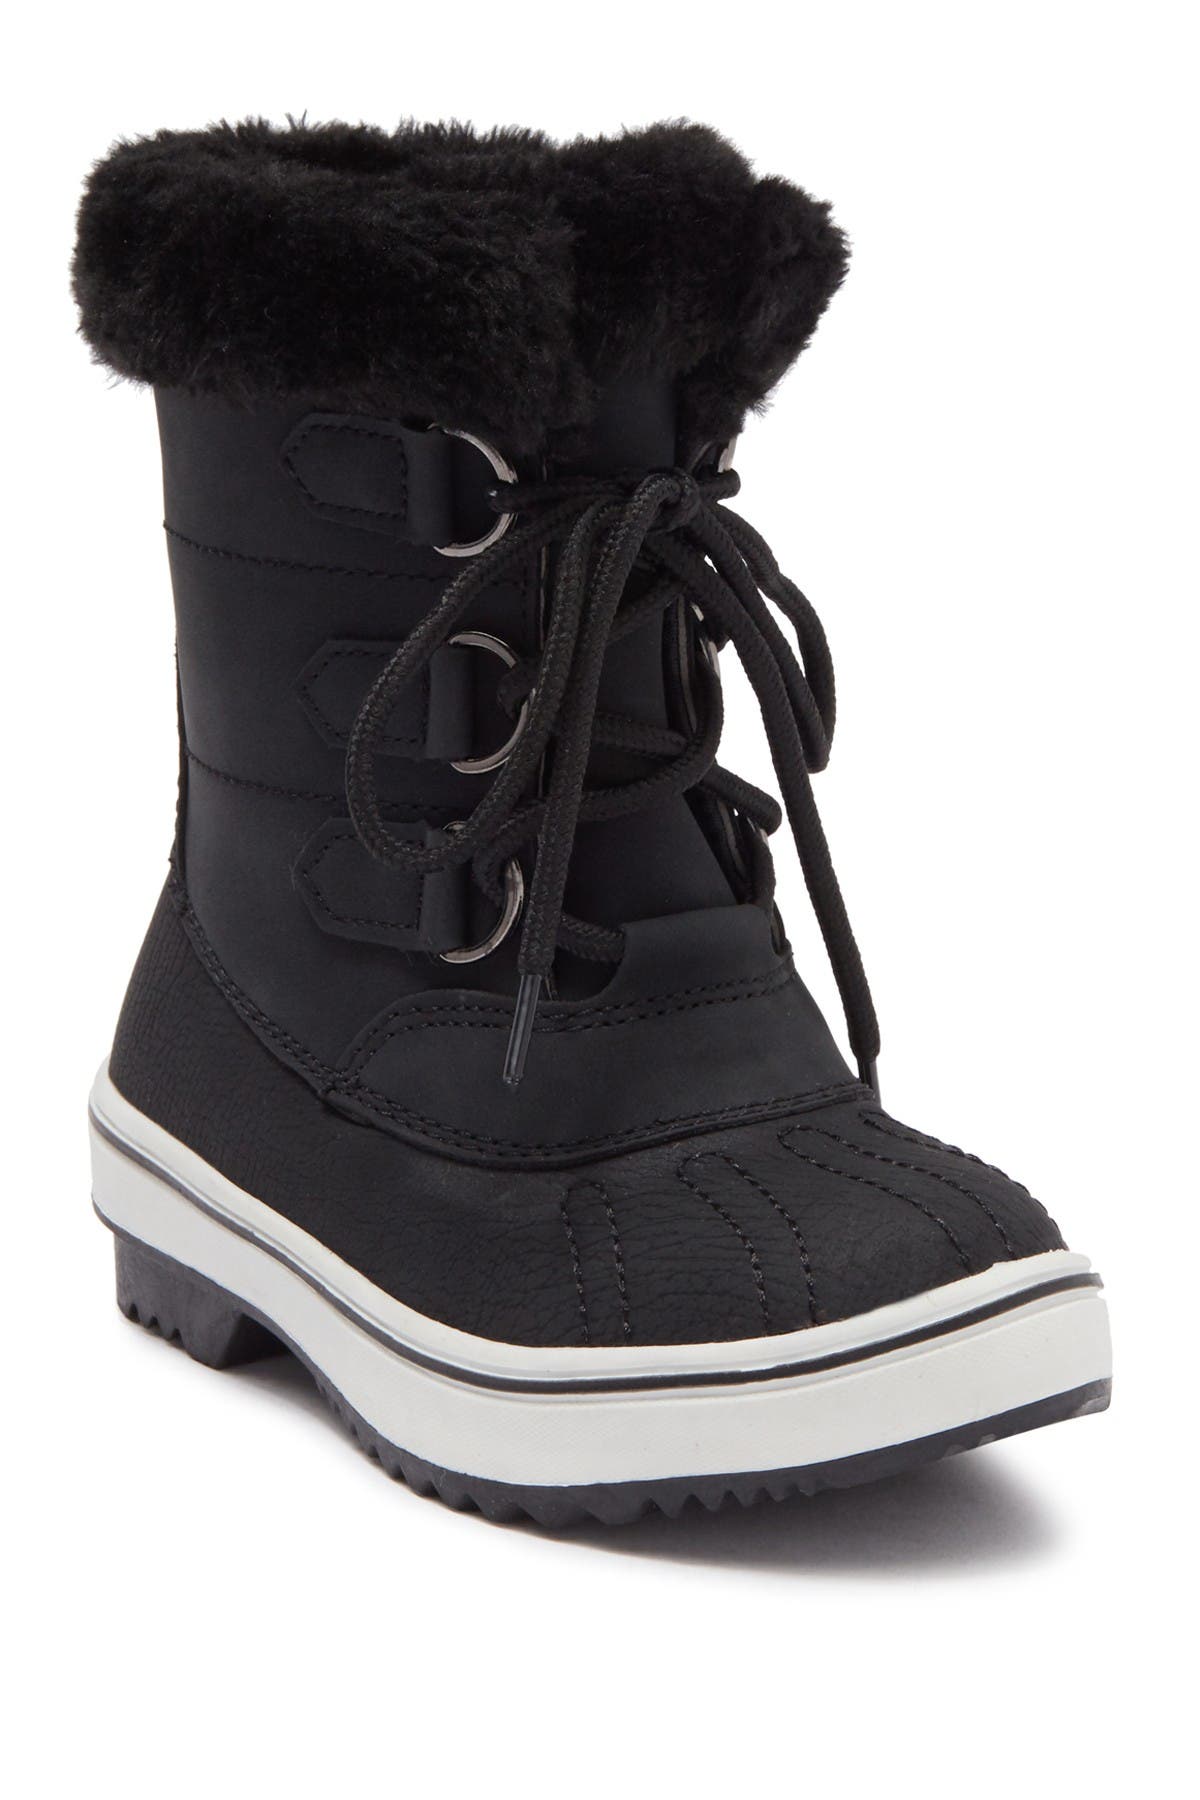 womens boots under $25